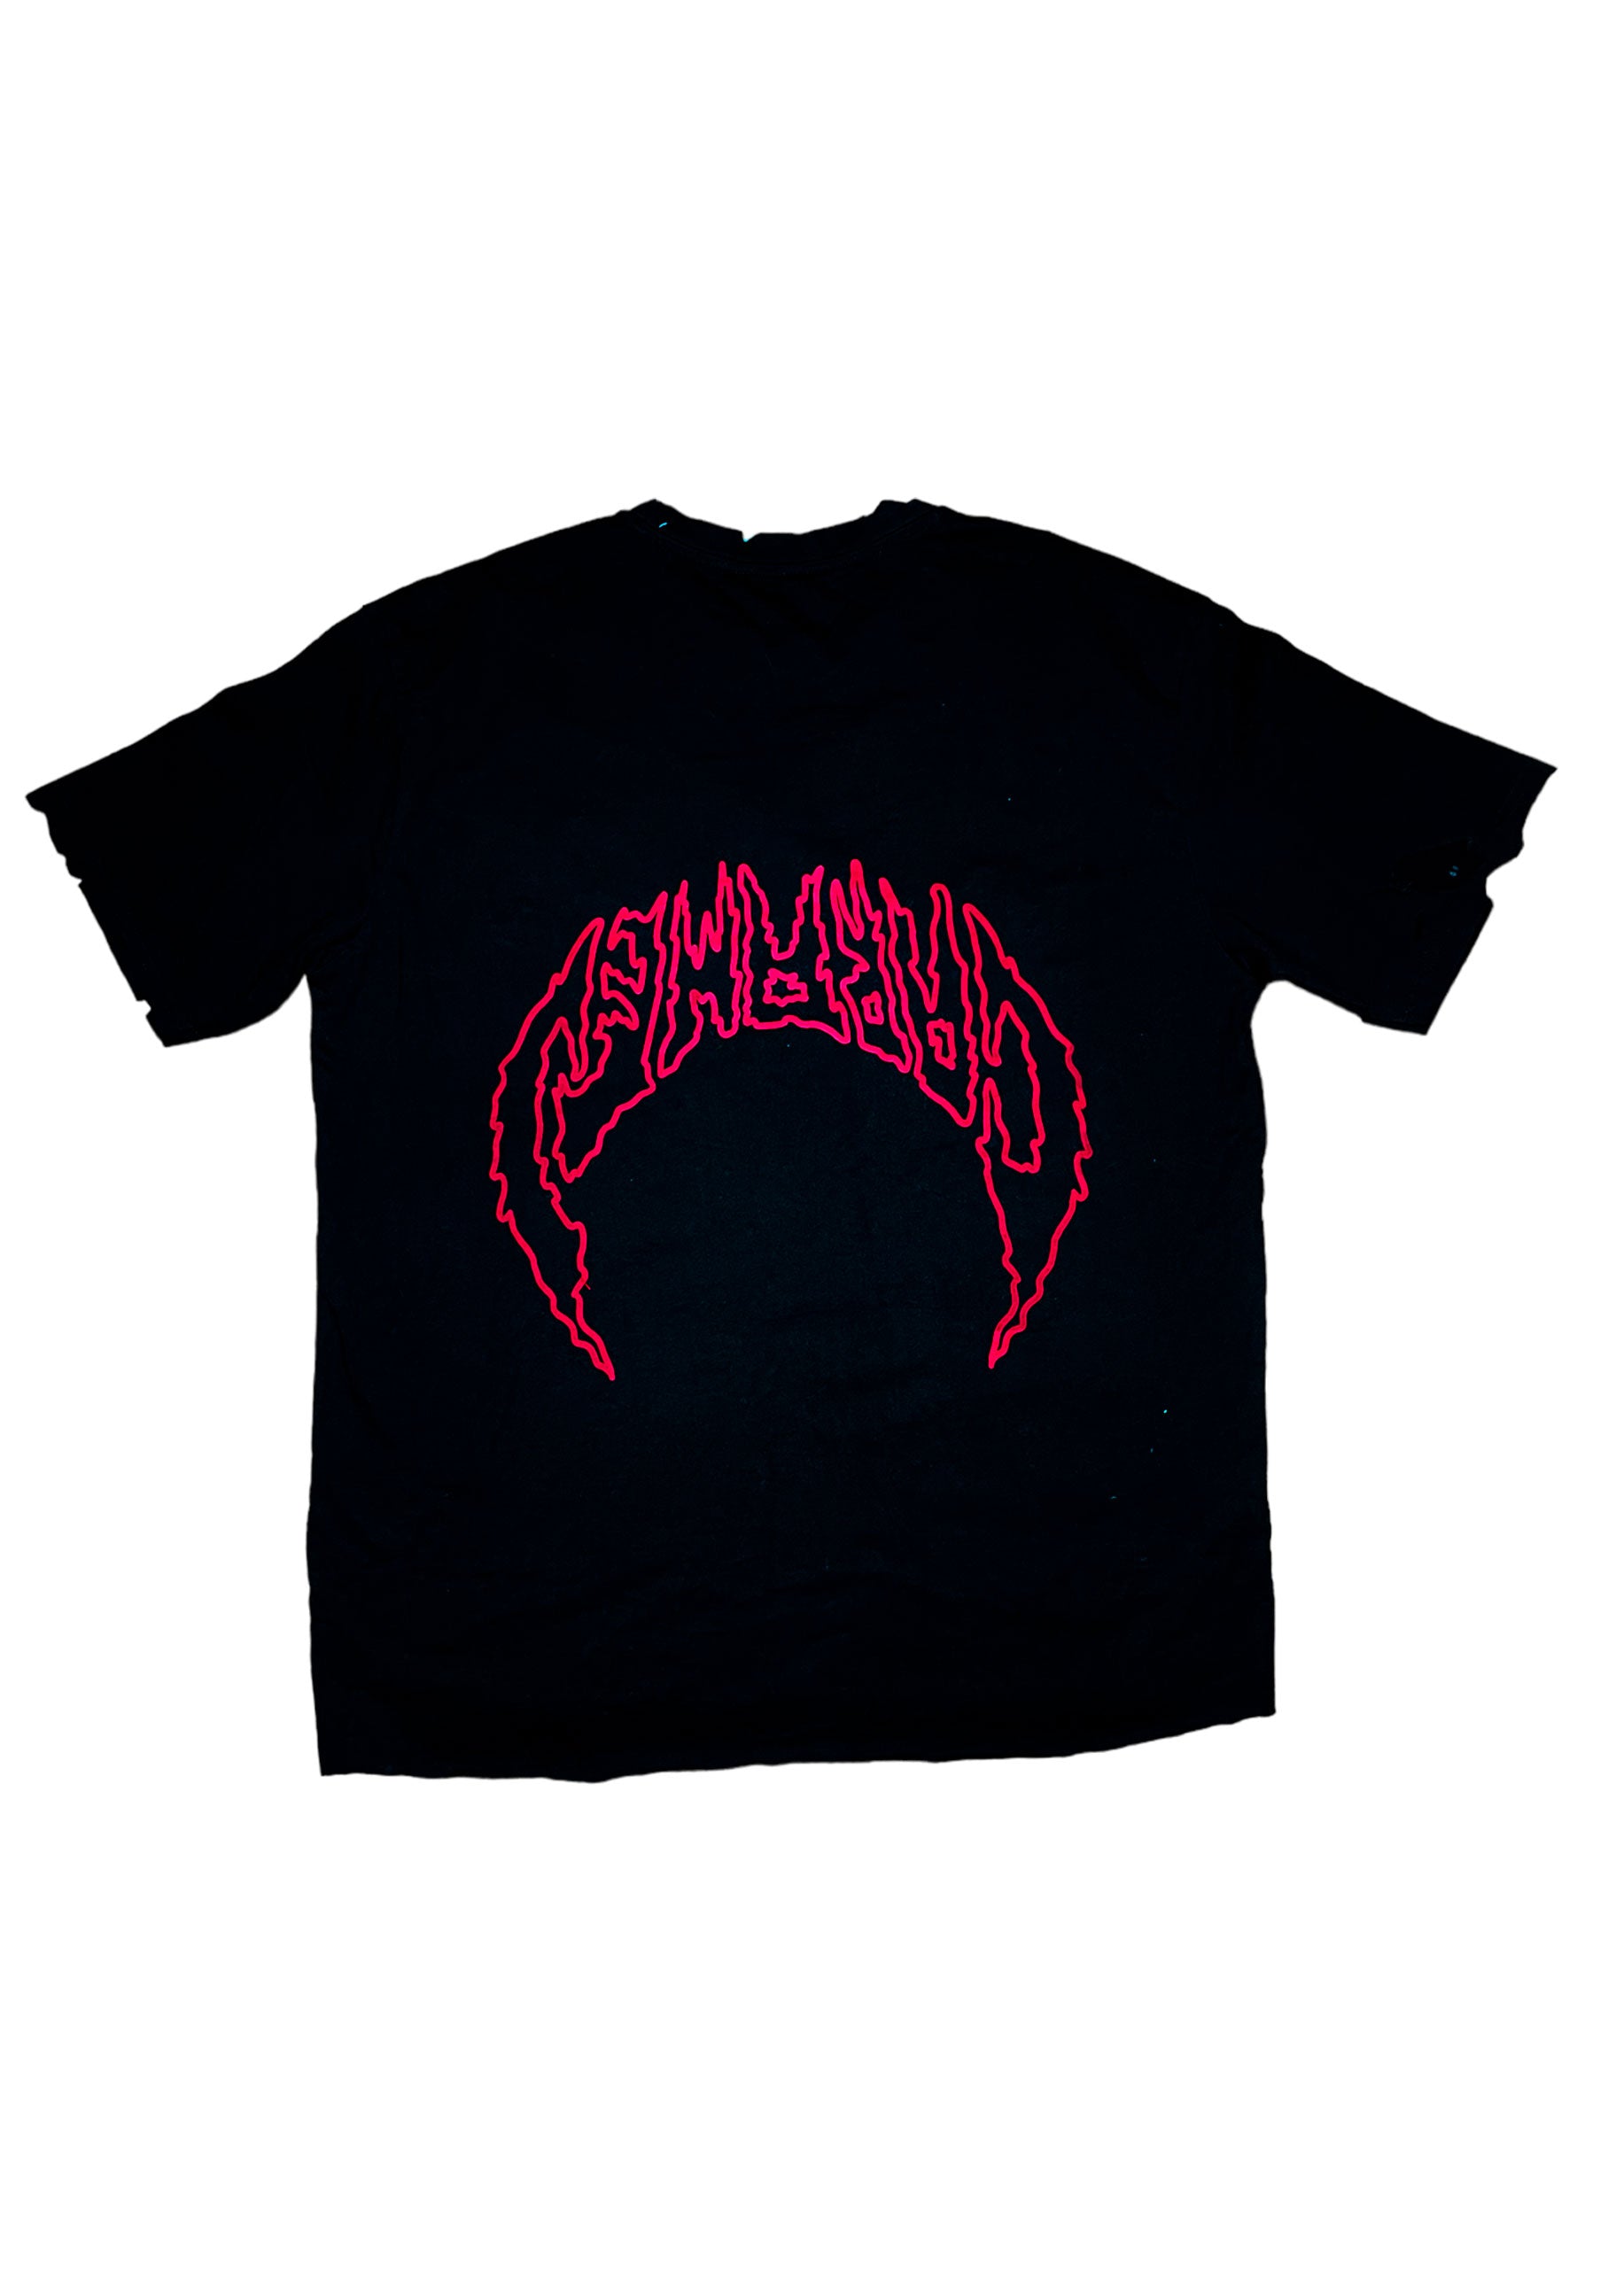 1/1 GASTERS T-SHIRT